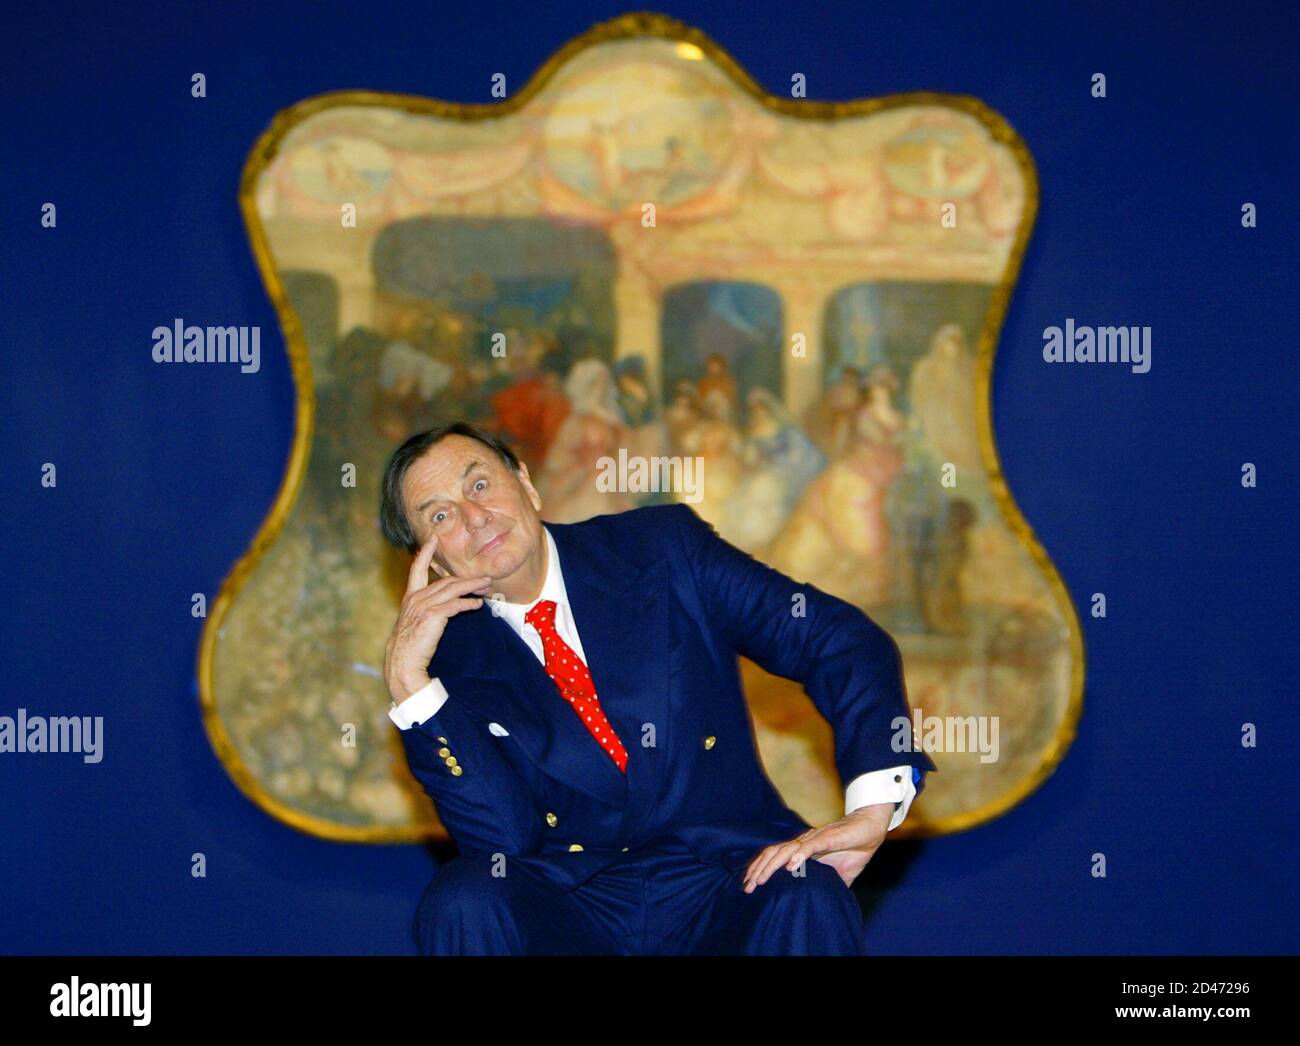 Australian comedian Barry Humphries poses in front of one of Australian artist Charles Condor's paintings at the launch of his retrospective at the New South Wales Art Gallery in Sydney June 12, 2003. Humphries, who owns alot of the works in the show, officially opened the exhibition which inlcudes 112 paintings of the world-renowned artist's watercolours, drawings and prints. REUTERS/David Gray  DG/CP Stock Photo